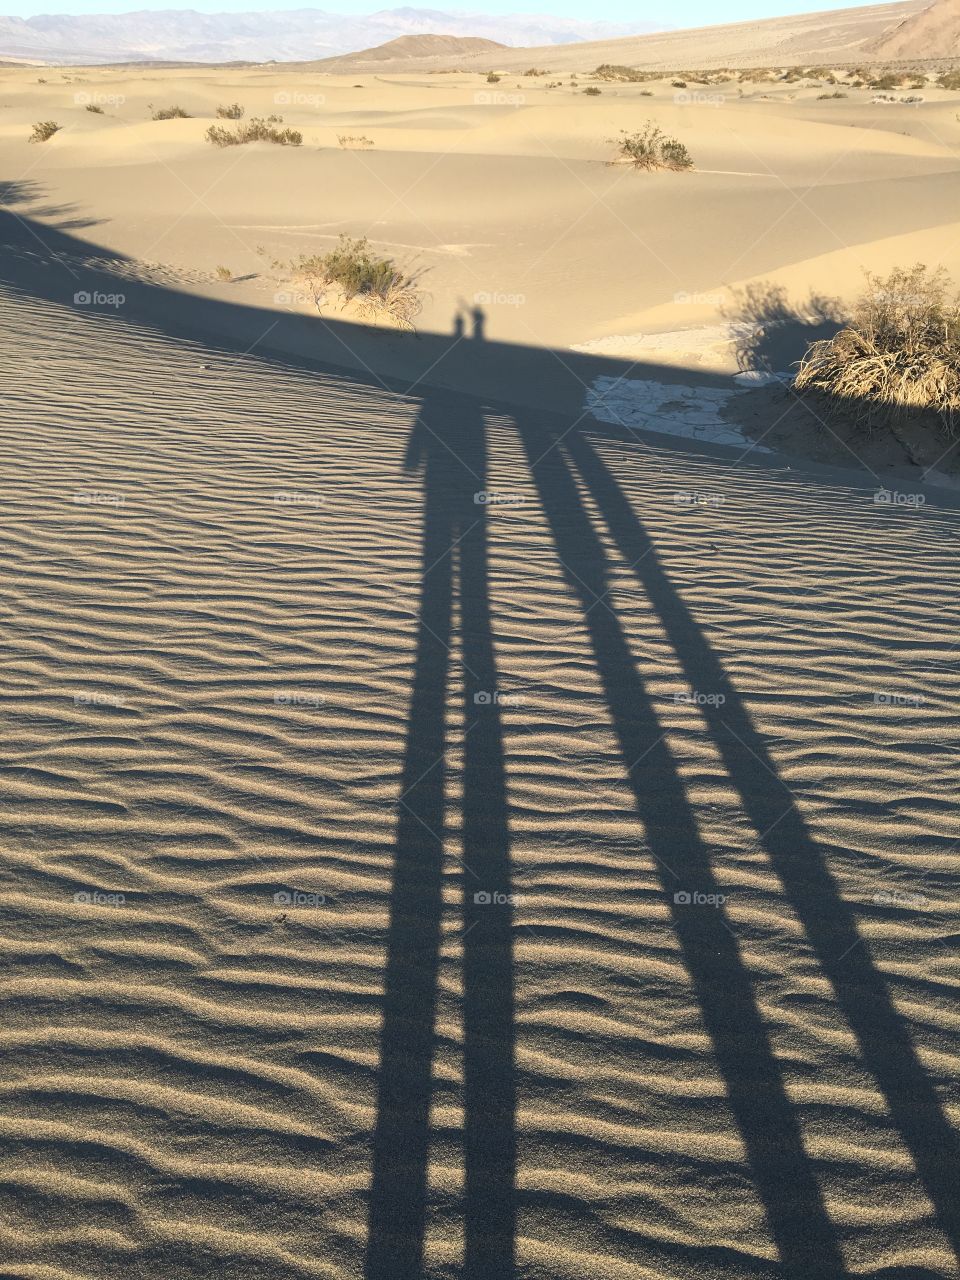 Shadows on the Sand dunes of Death Valley 